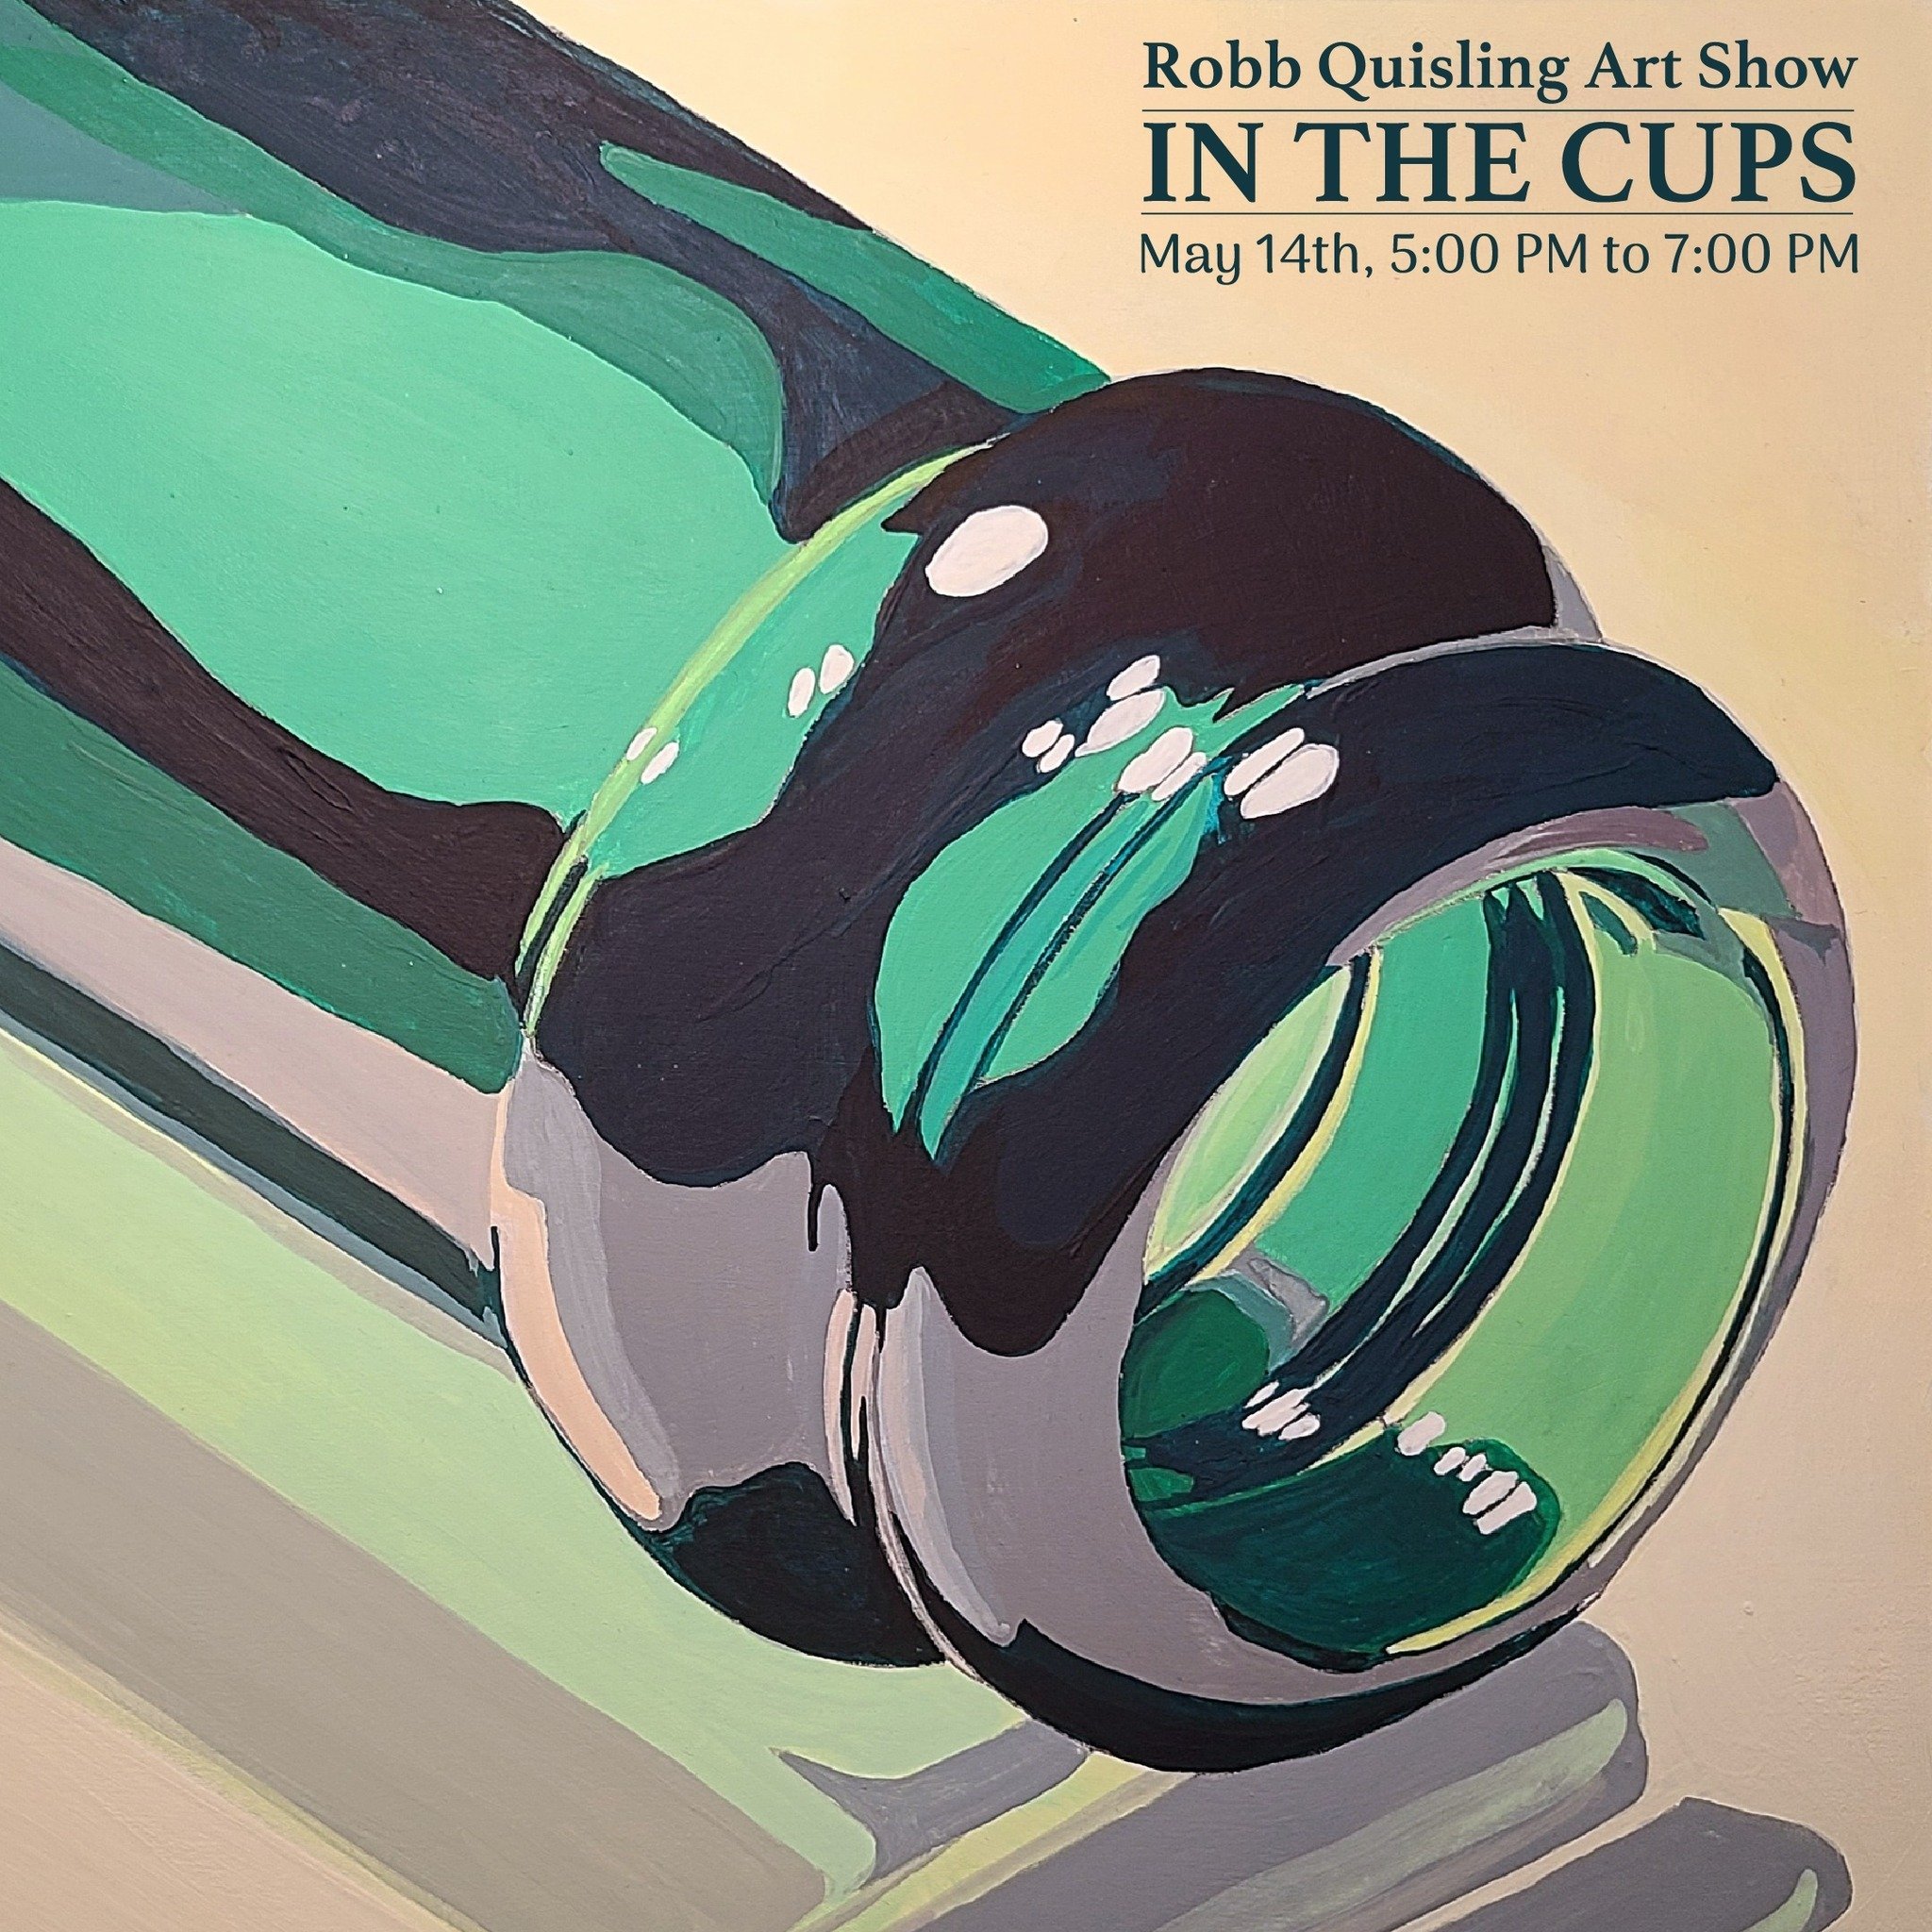 Get ready for a night of art and jazz! Join us for &quot;In The Cups&quot; by Robb Quisling at Rathskellers on May 14th, 5-7 PM. Dive into paintings exploring our ties with alcohol.

Stay after for The Hot Club of Duluth, playing live jazz from 7:30-